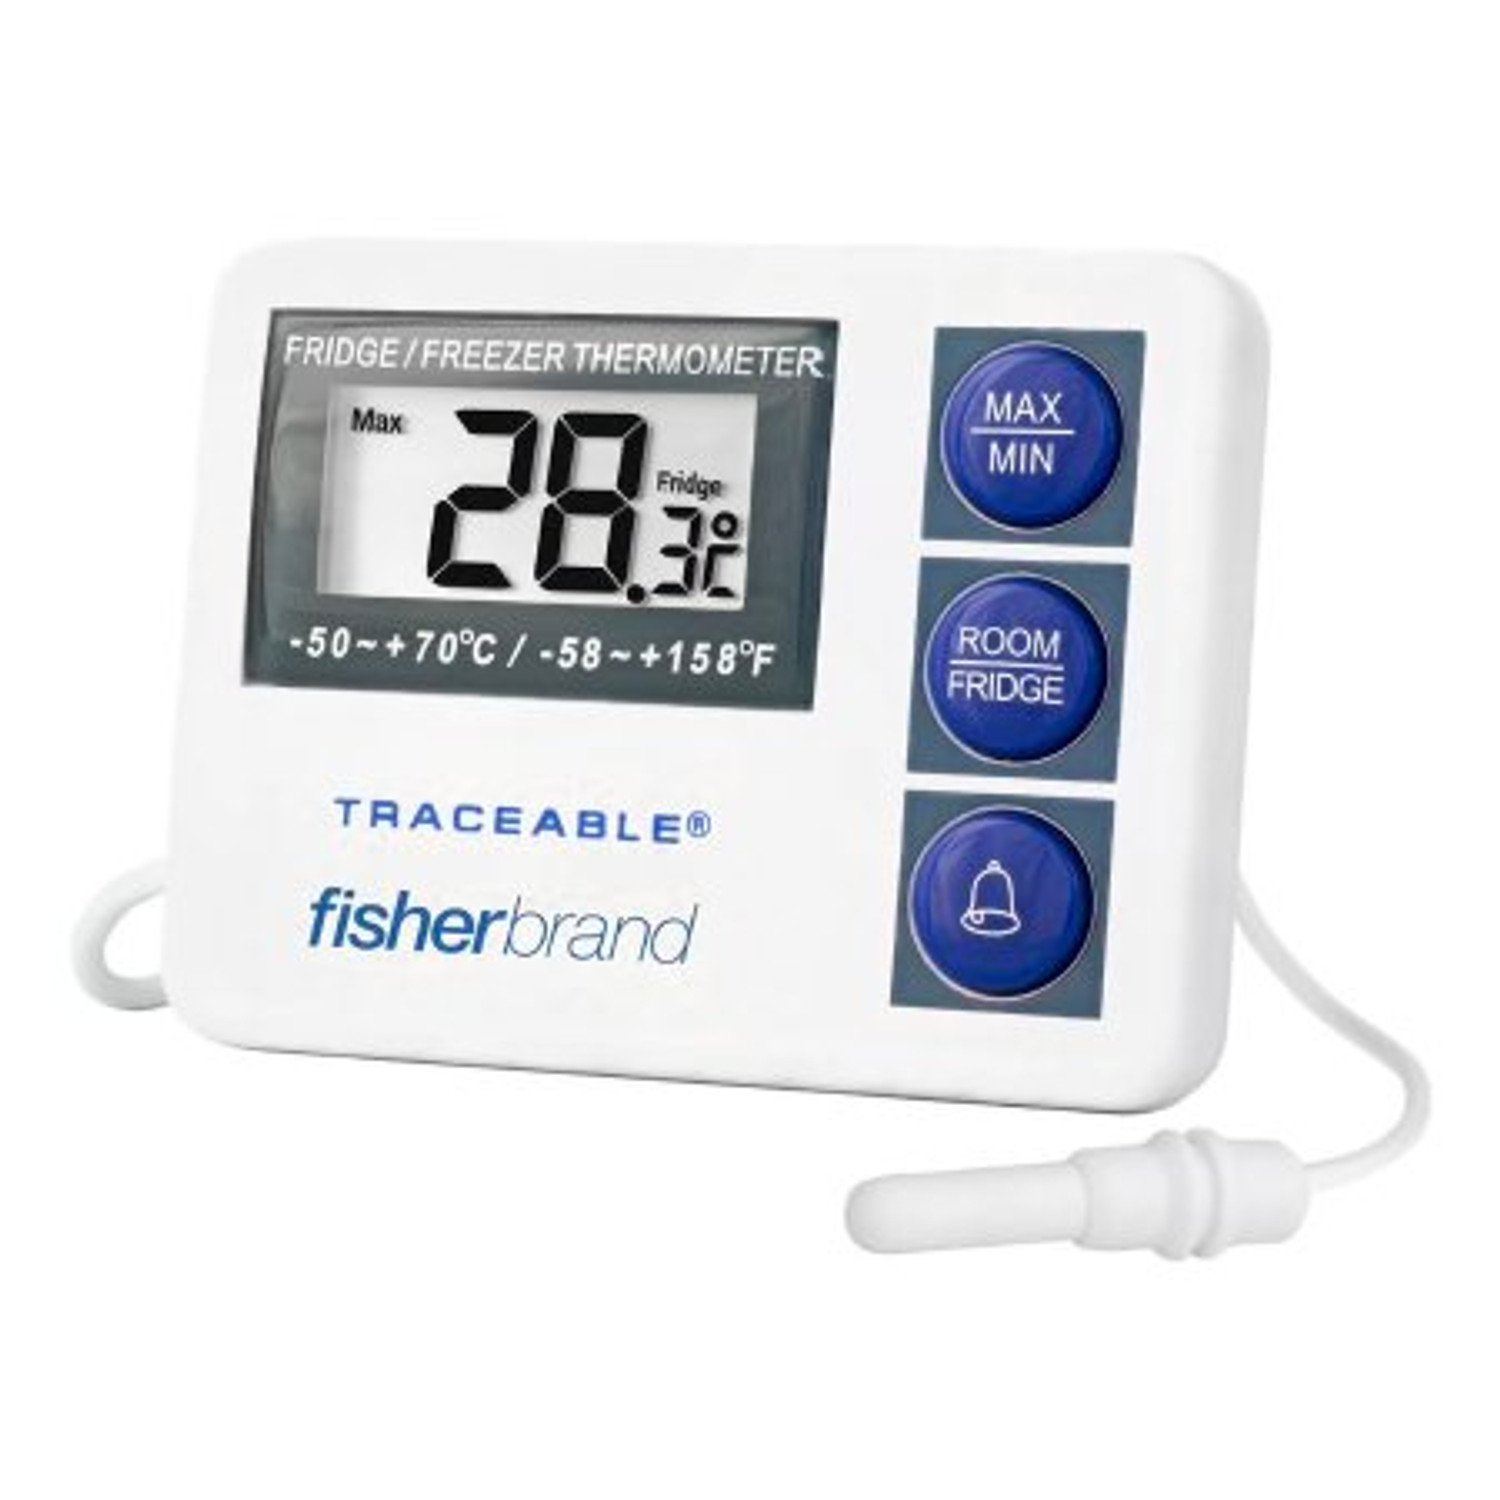 Digital Refrigerator / Freezer Thermometer with Alarm Fisherbrand  Fahrenheit / Celsius -58 to 158 F -50 to 70 C External Probe Flip-out Stand  / Wall